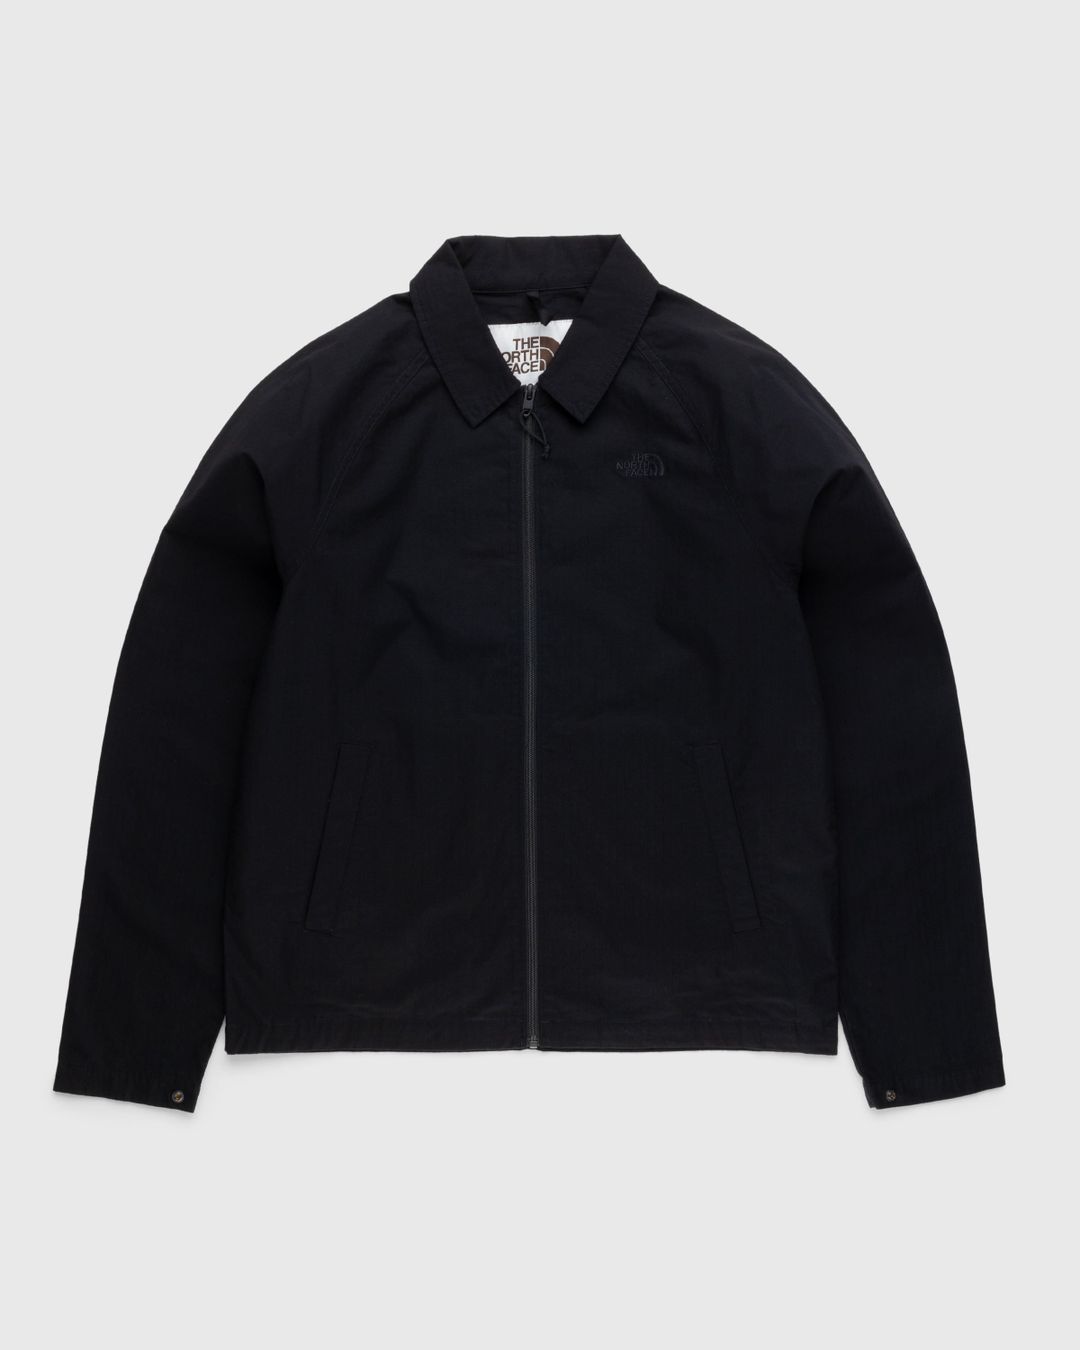 The North Face – Coaches Jacket TNF Black | Highsnobiety Shop